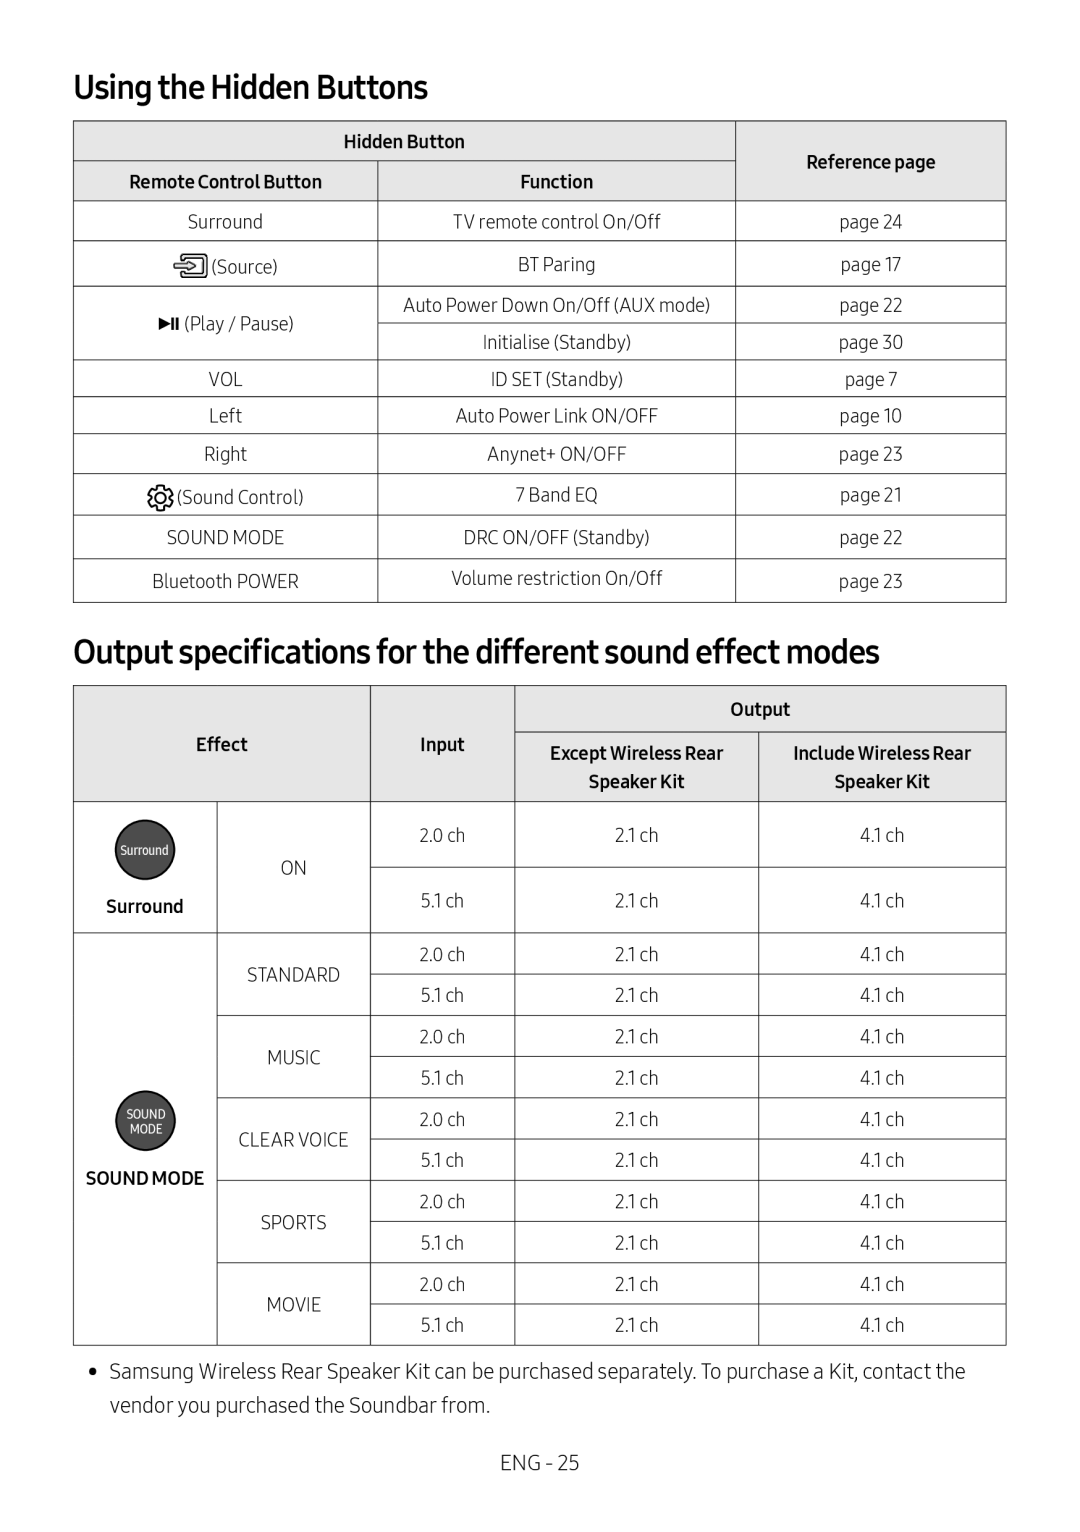 Samsung HW-M450/ZG Using the Hidden Buttons, Output specifications for the different sound effect modes, Reference page 